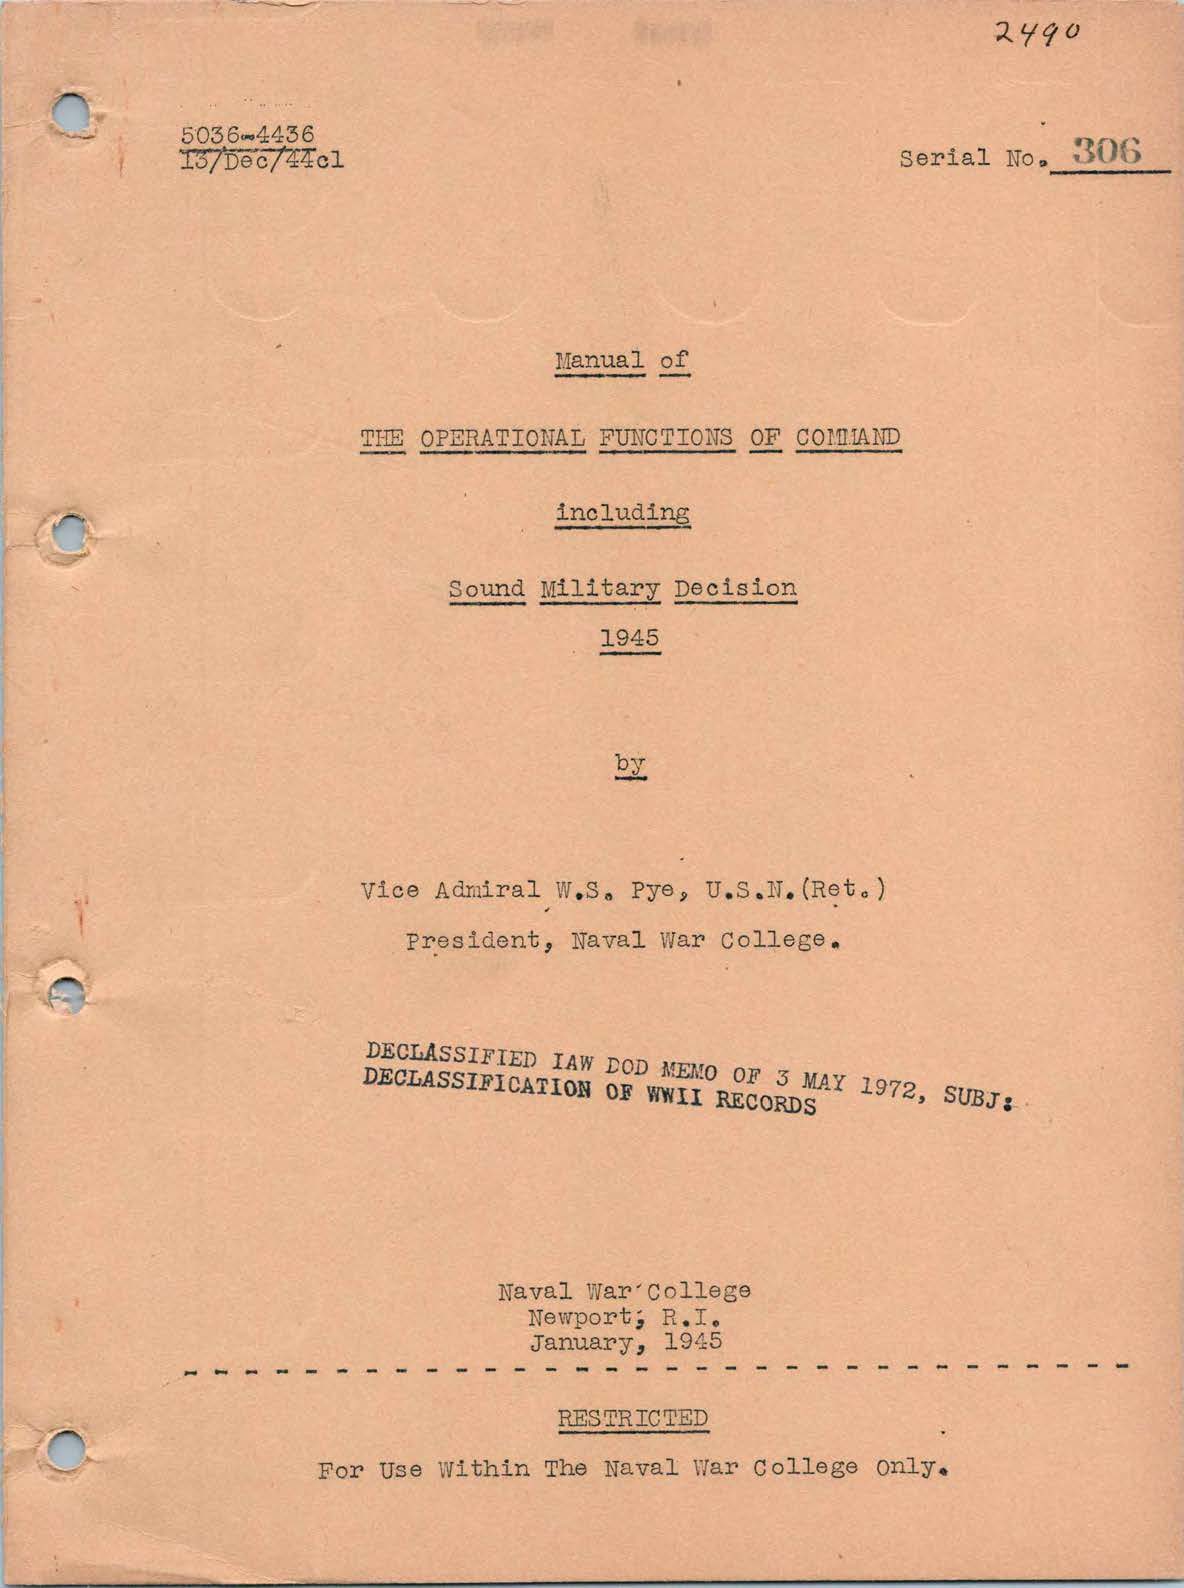 Operational Functions of Command including Sound Military Decision 1945